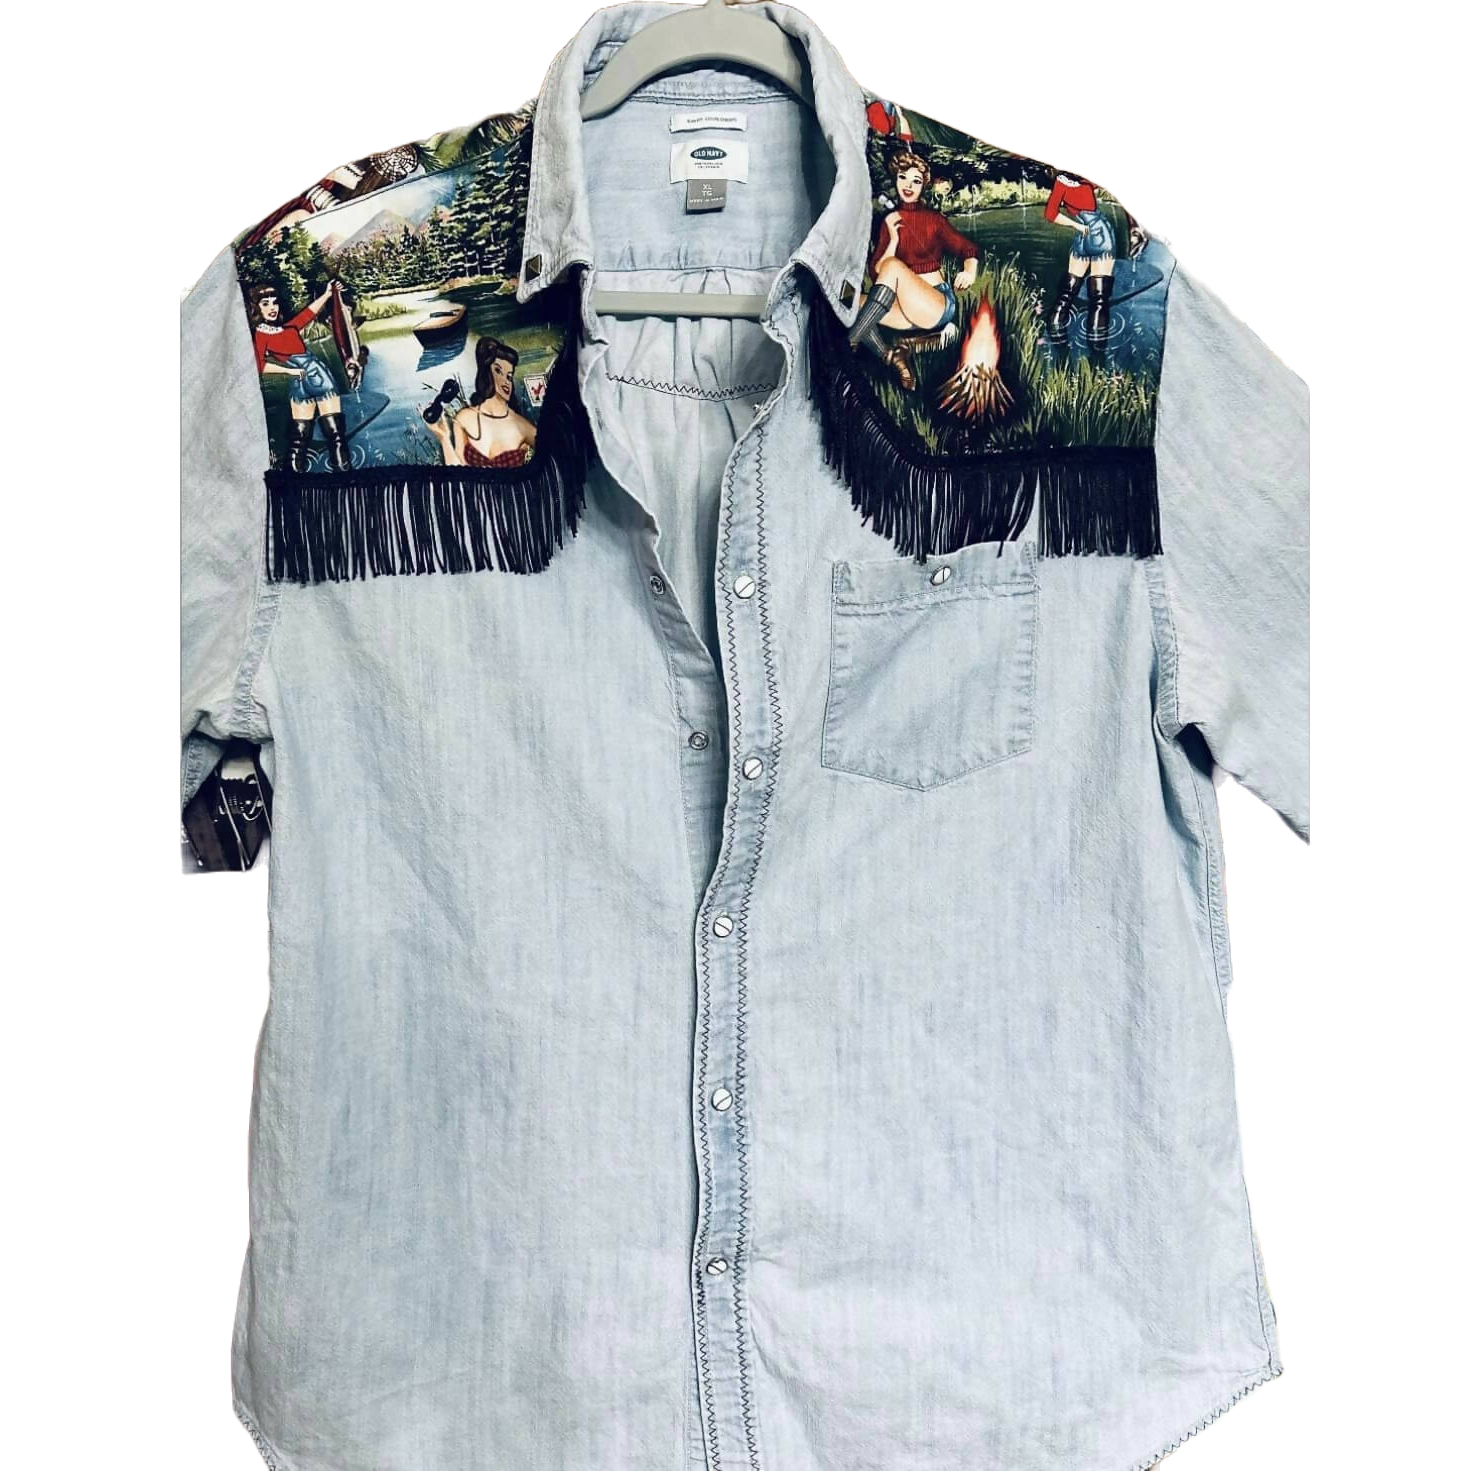 Western Shirt Embellished with Alexander Henry Fabric, Fringe and Pearl Snaps